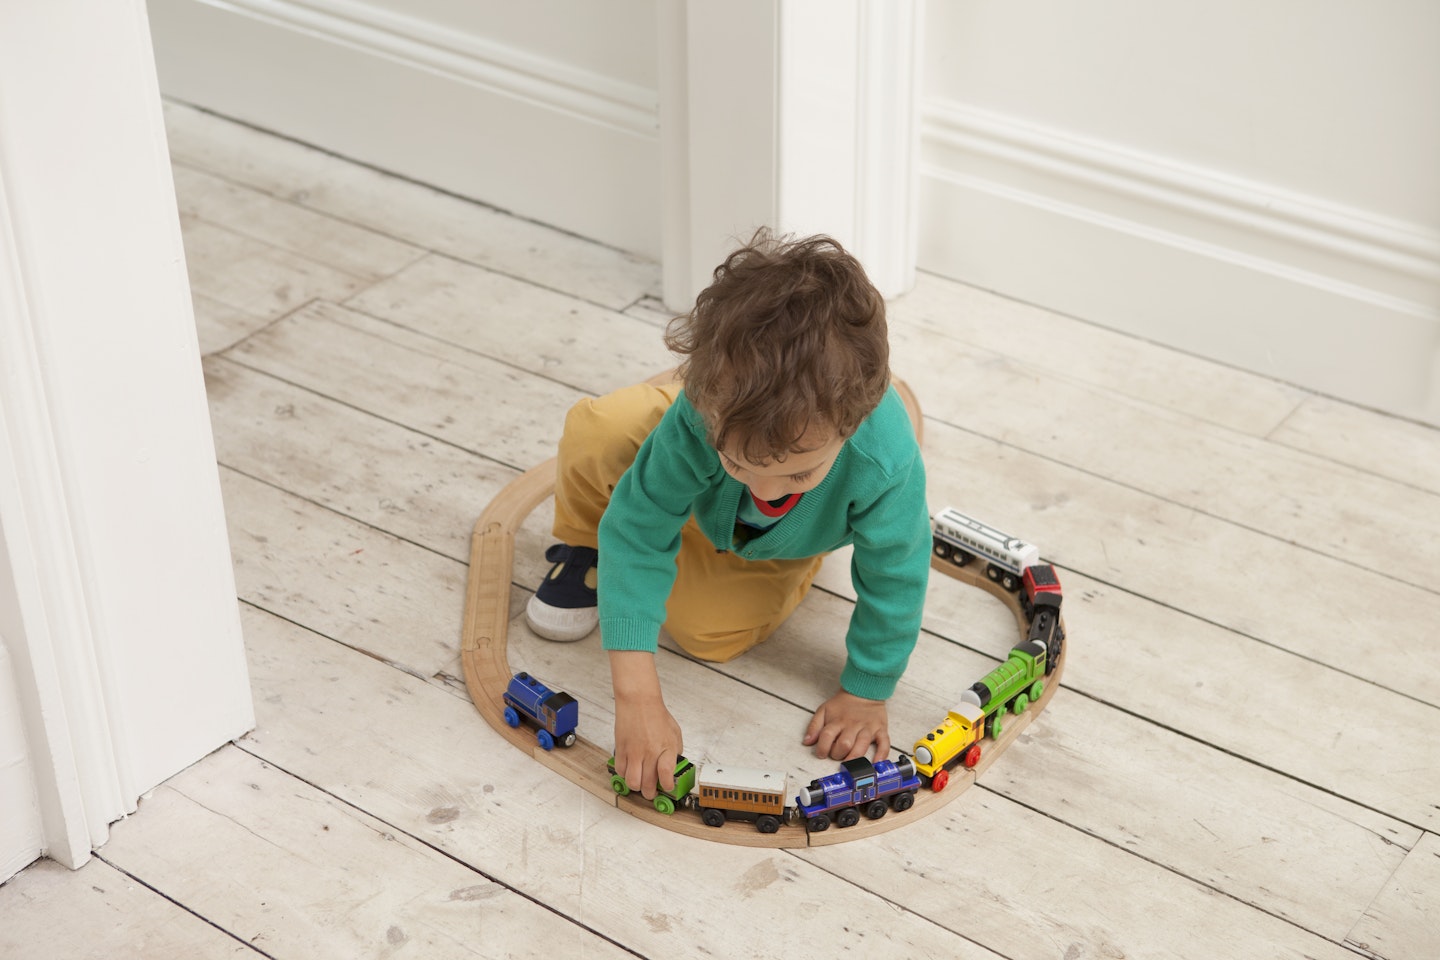 Toddler playing with train set